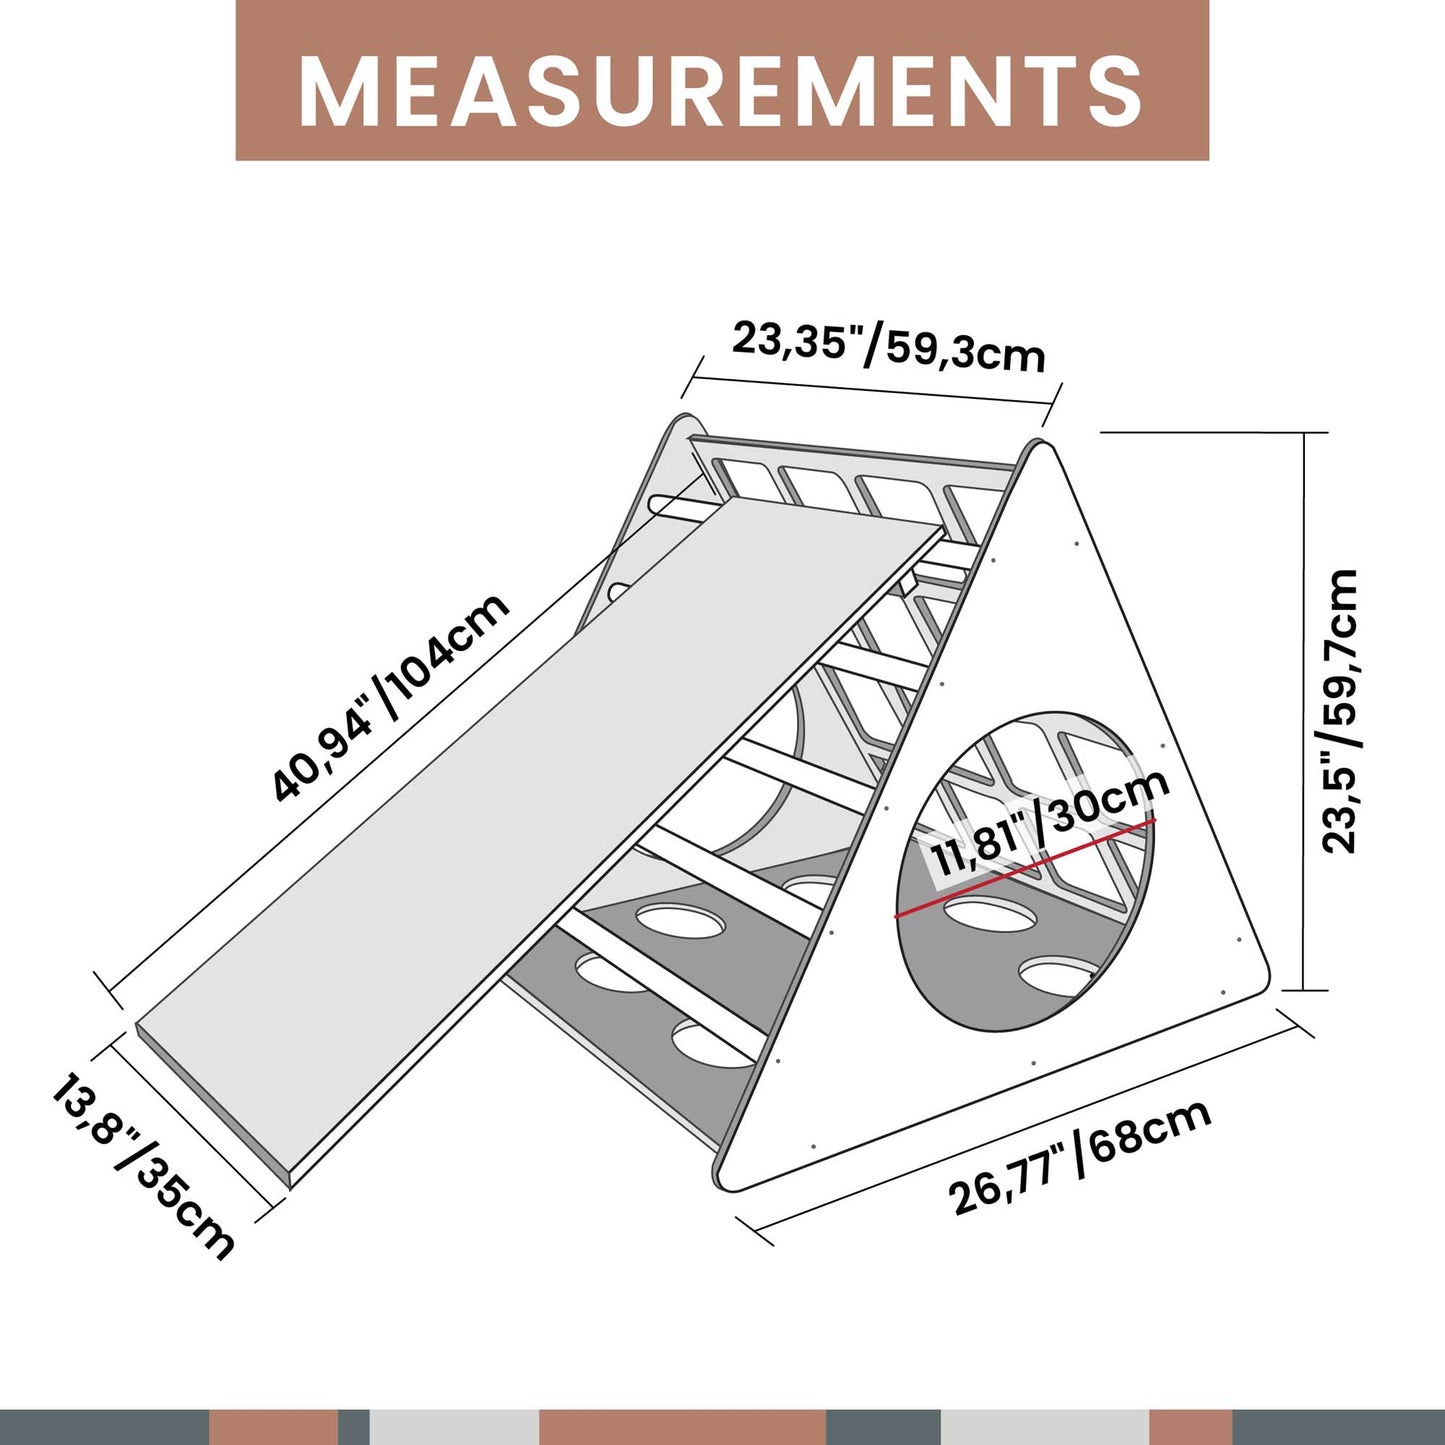 Measurements of a climbing triangle with three sensory sides and an accompanying ramp, offering dimensions for reference in assessing size and scale.